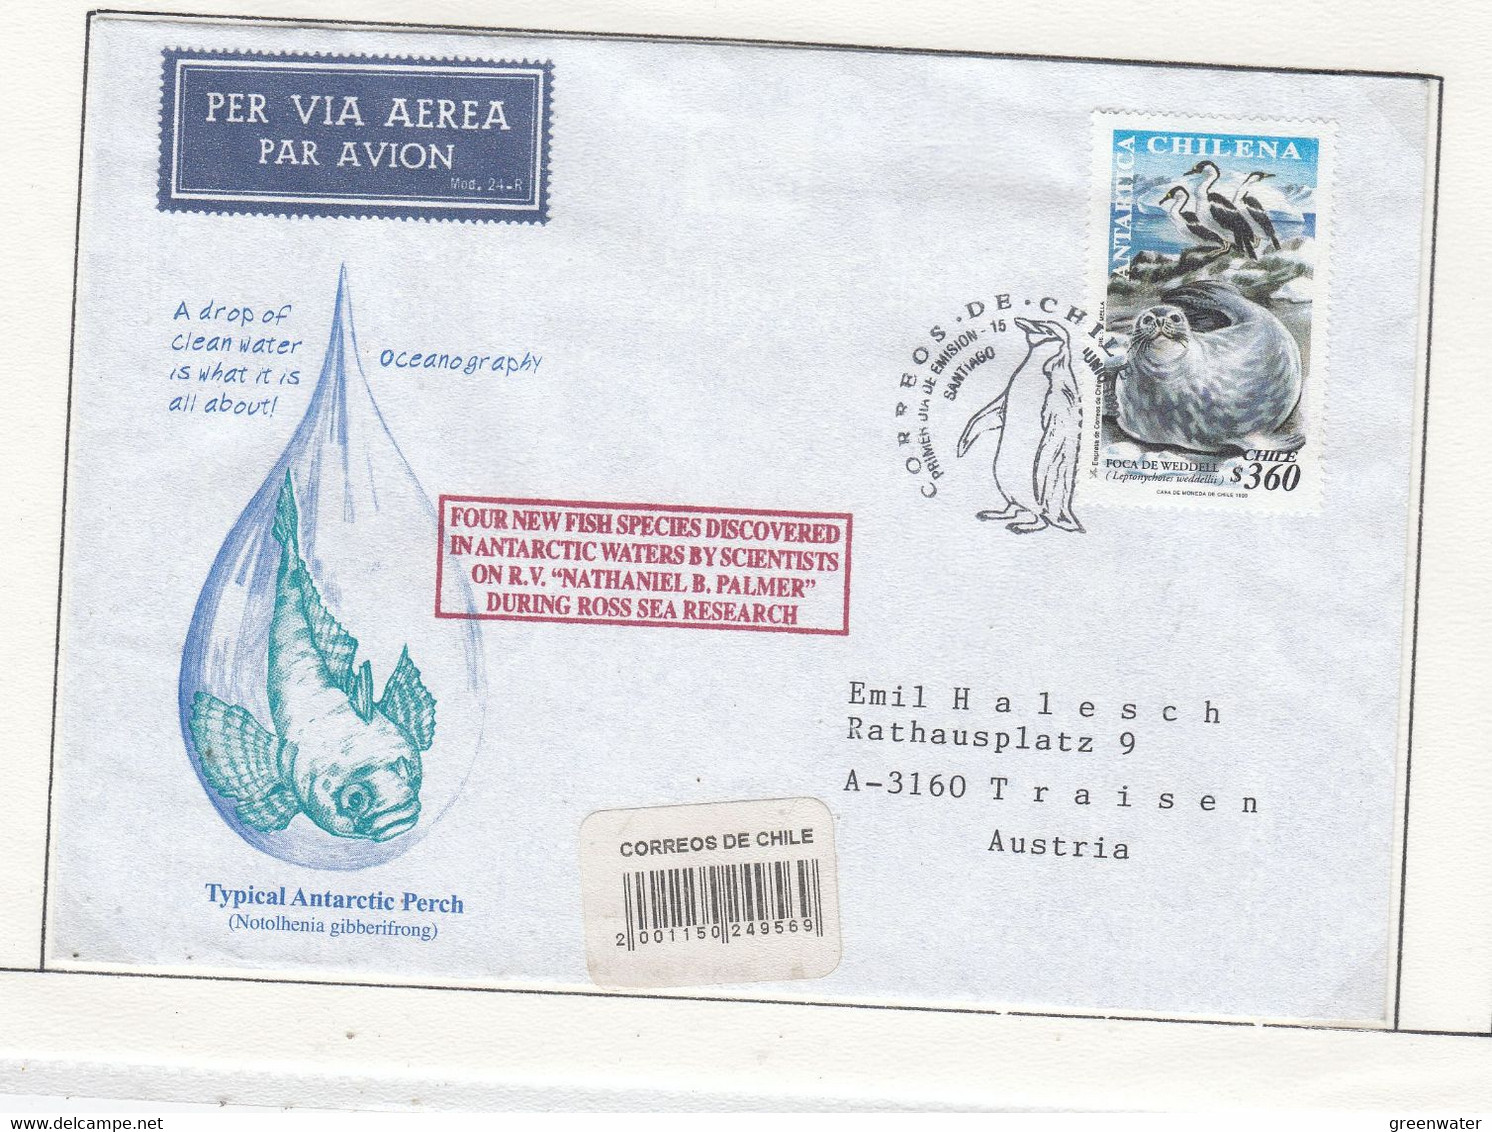 CHILE 1998 Cover "4 New Fish Discovered In The Antarctic Waters" Ca 1998 (CH163A) - Research Programs